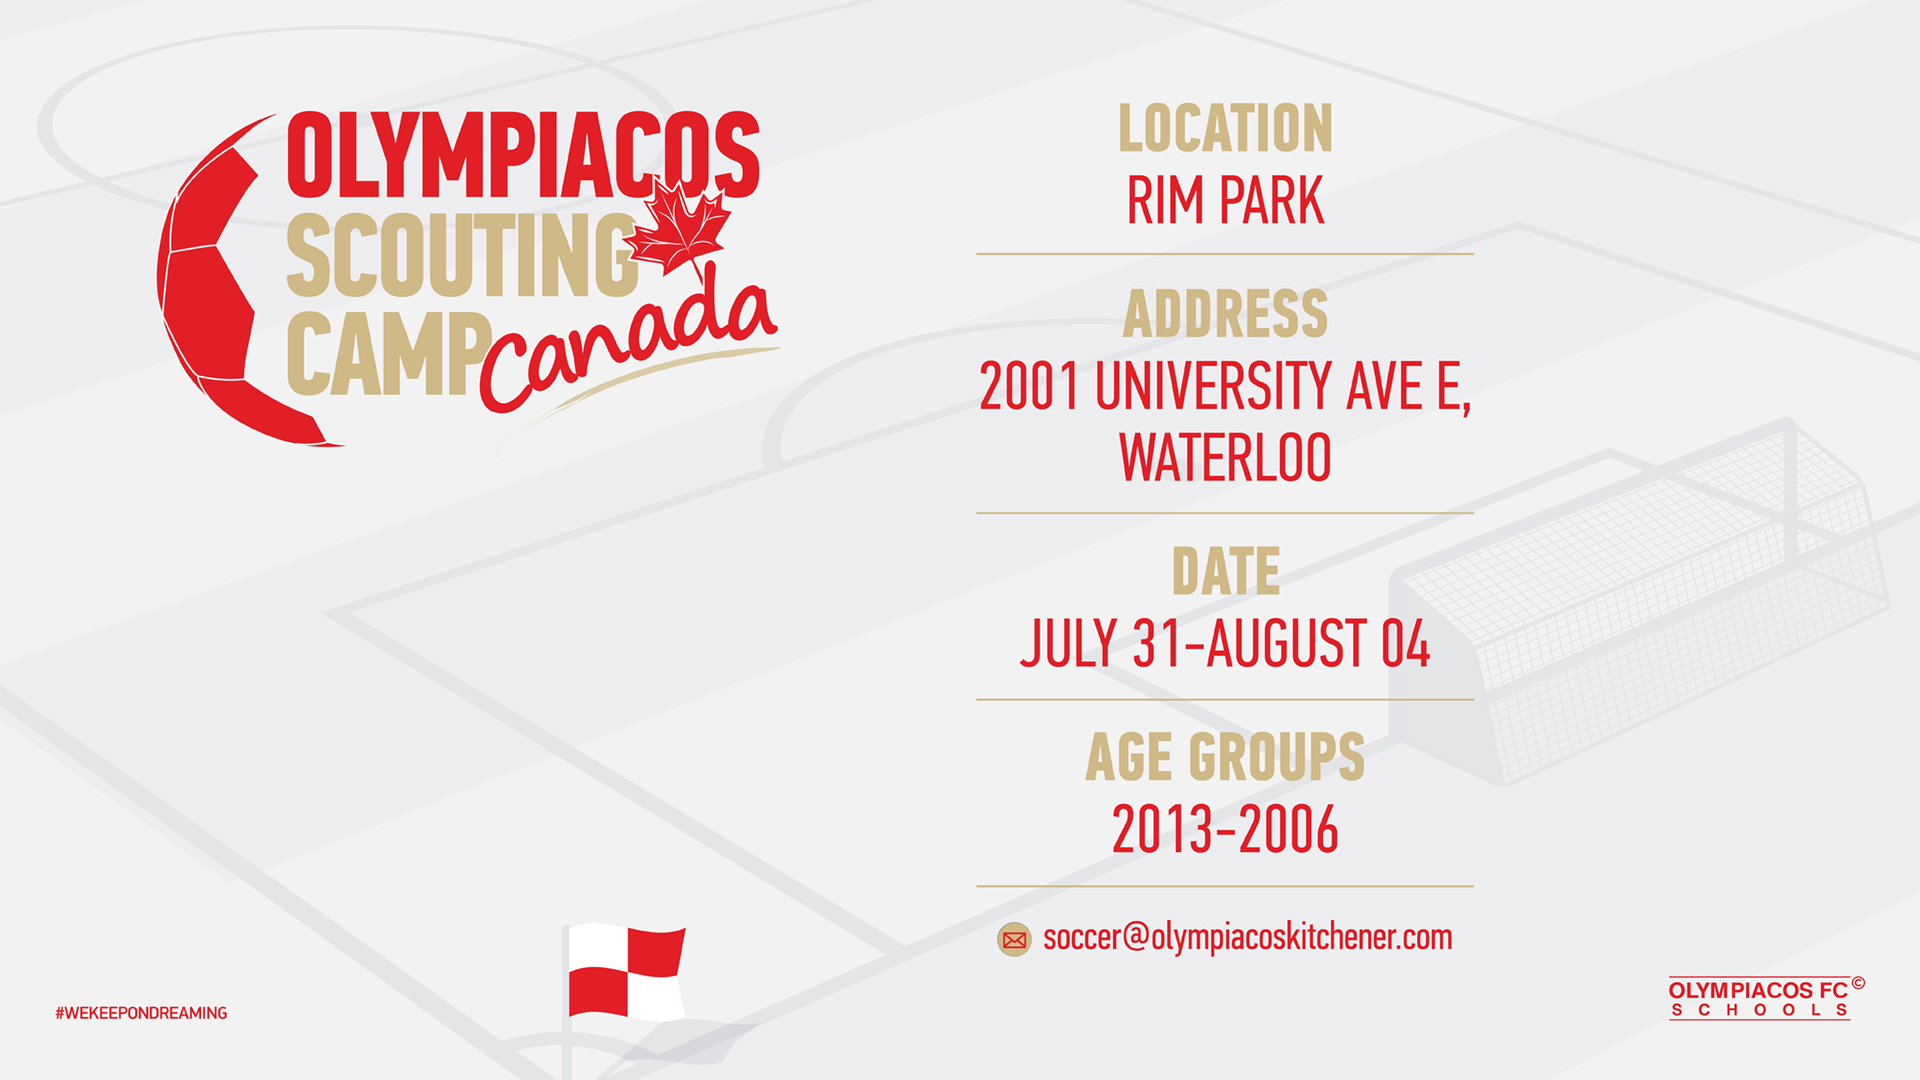 The first Olympiacos Scouting Camp in Canada is up and running!